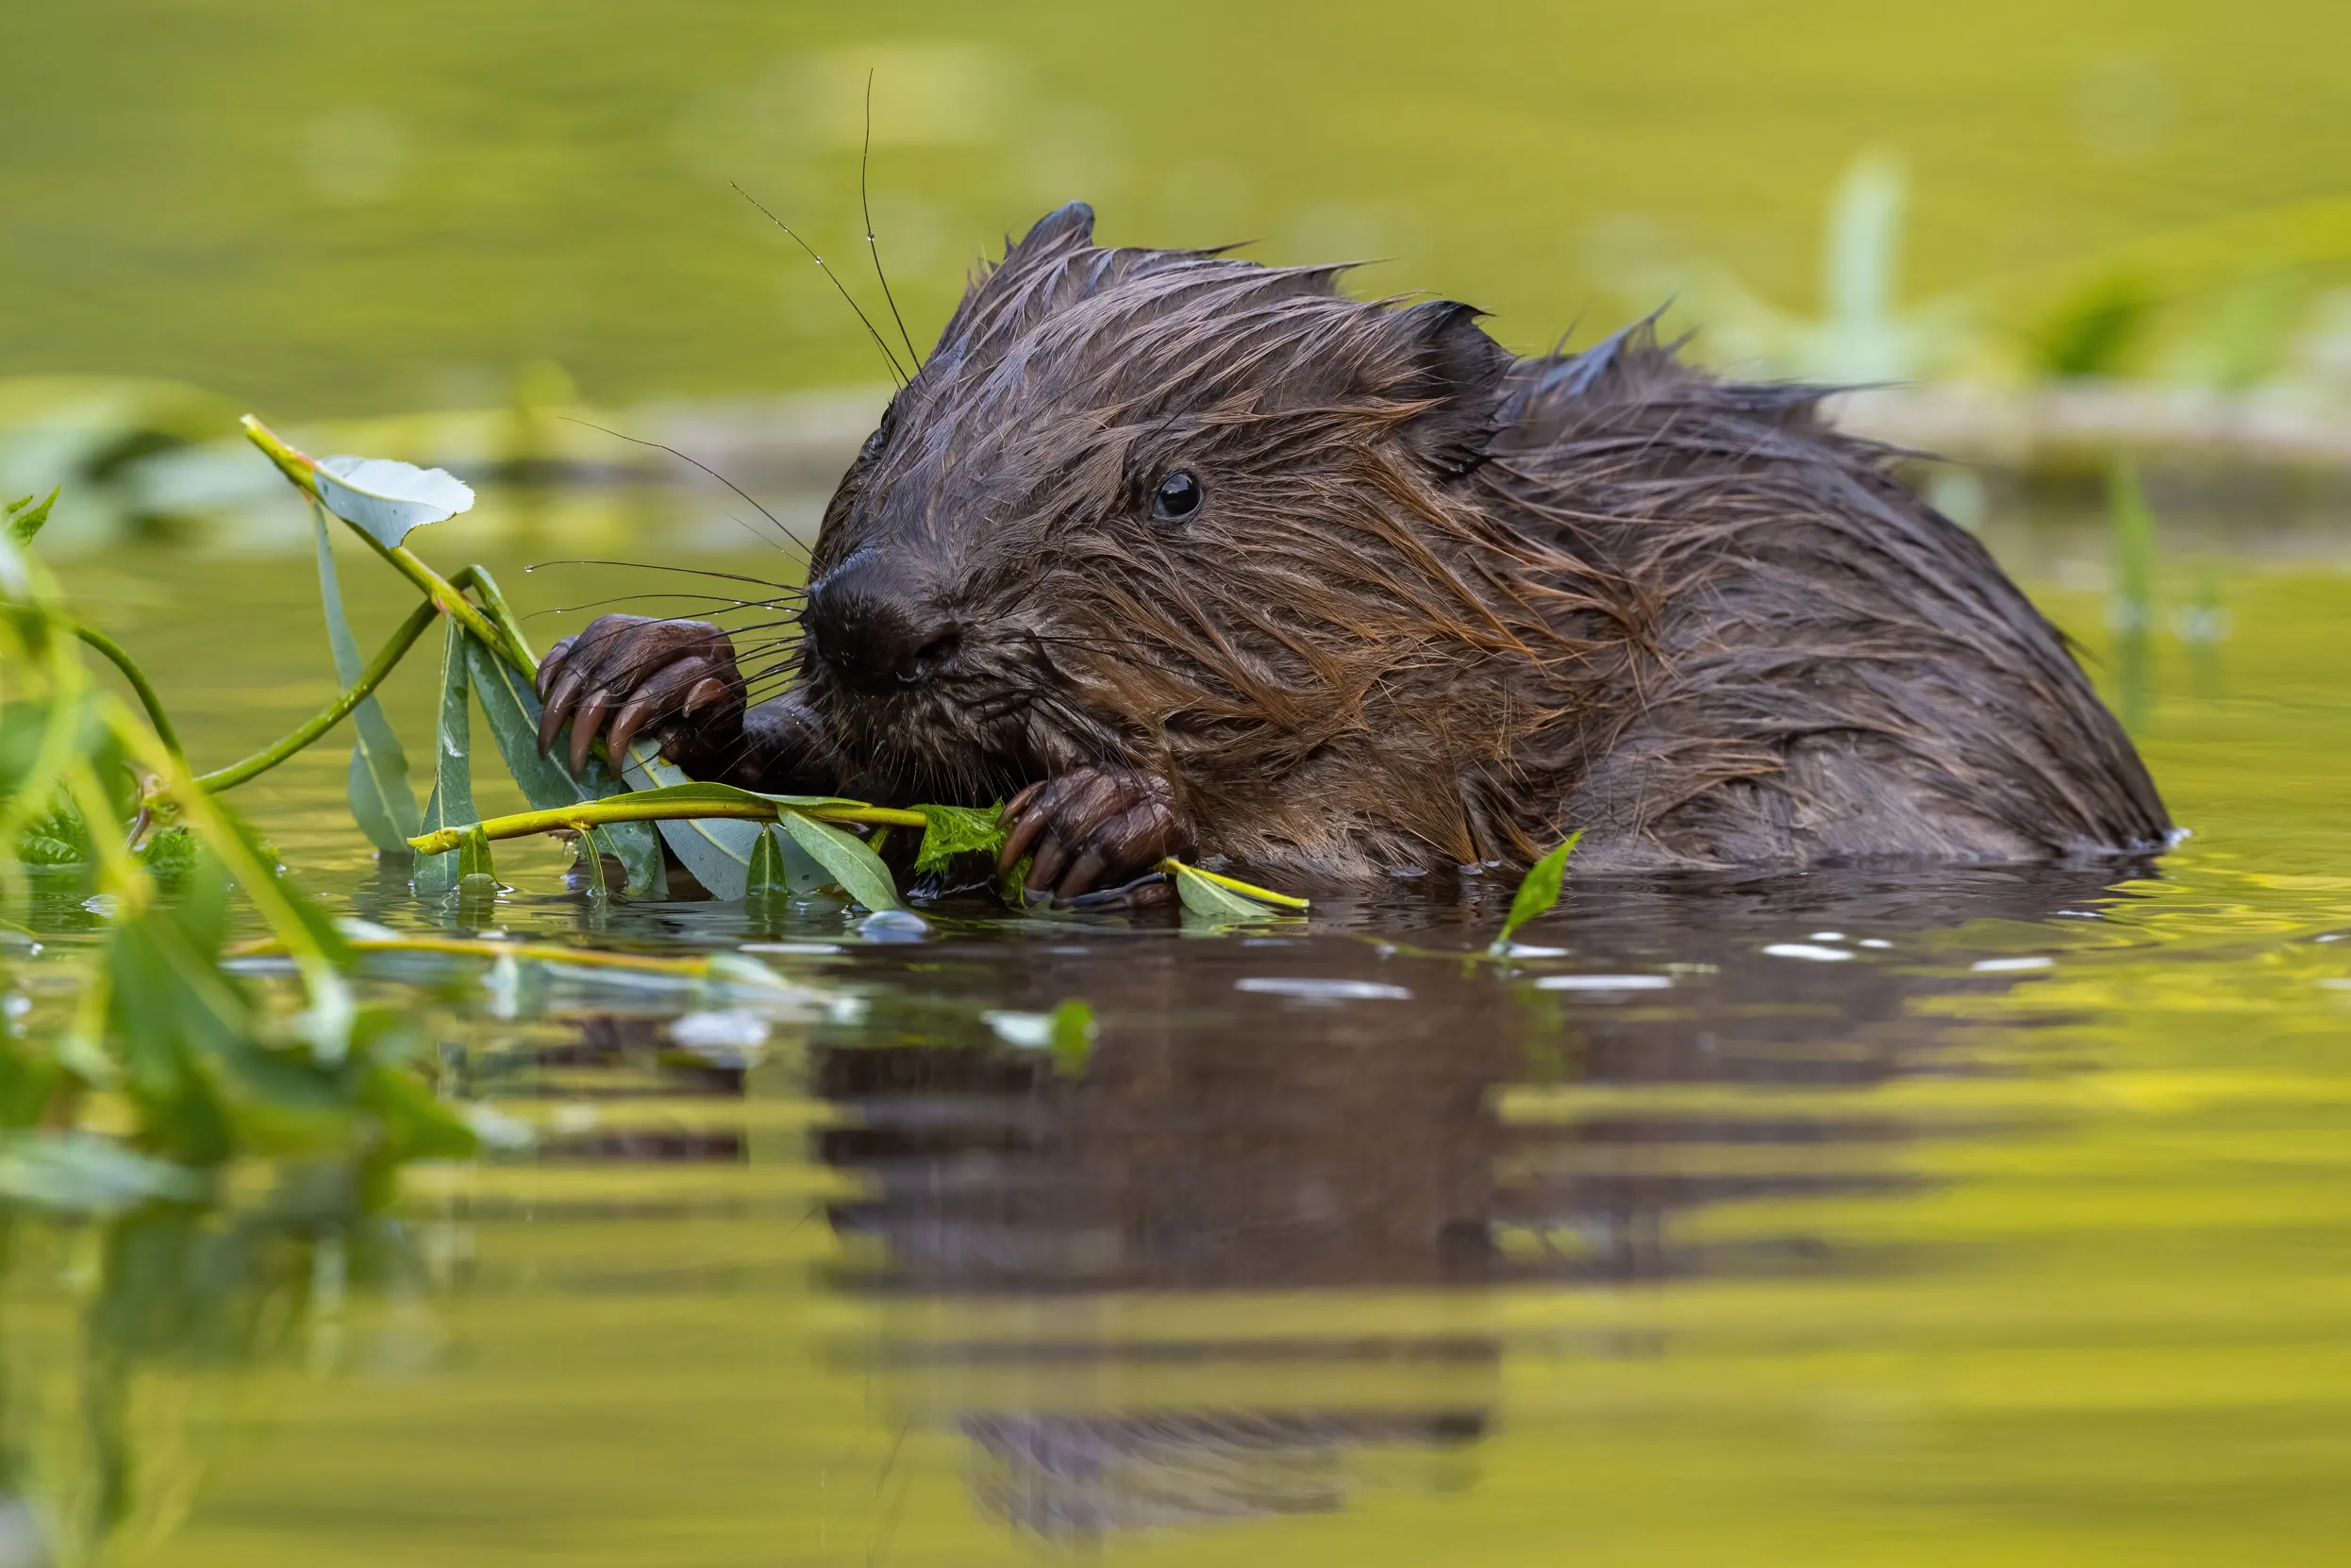 A lone Beaver sitting in shallow water and chewing on a leafy branch.